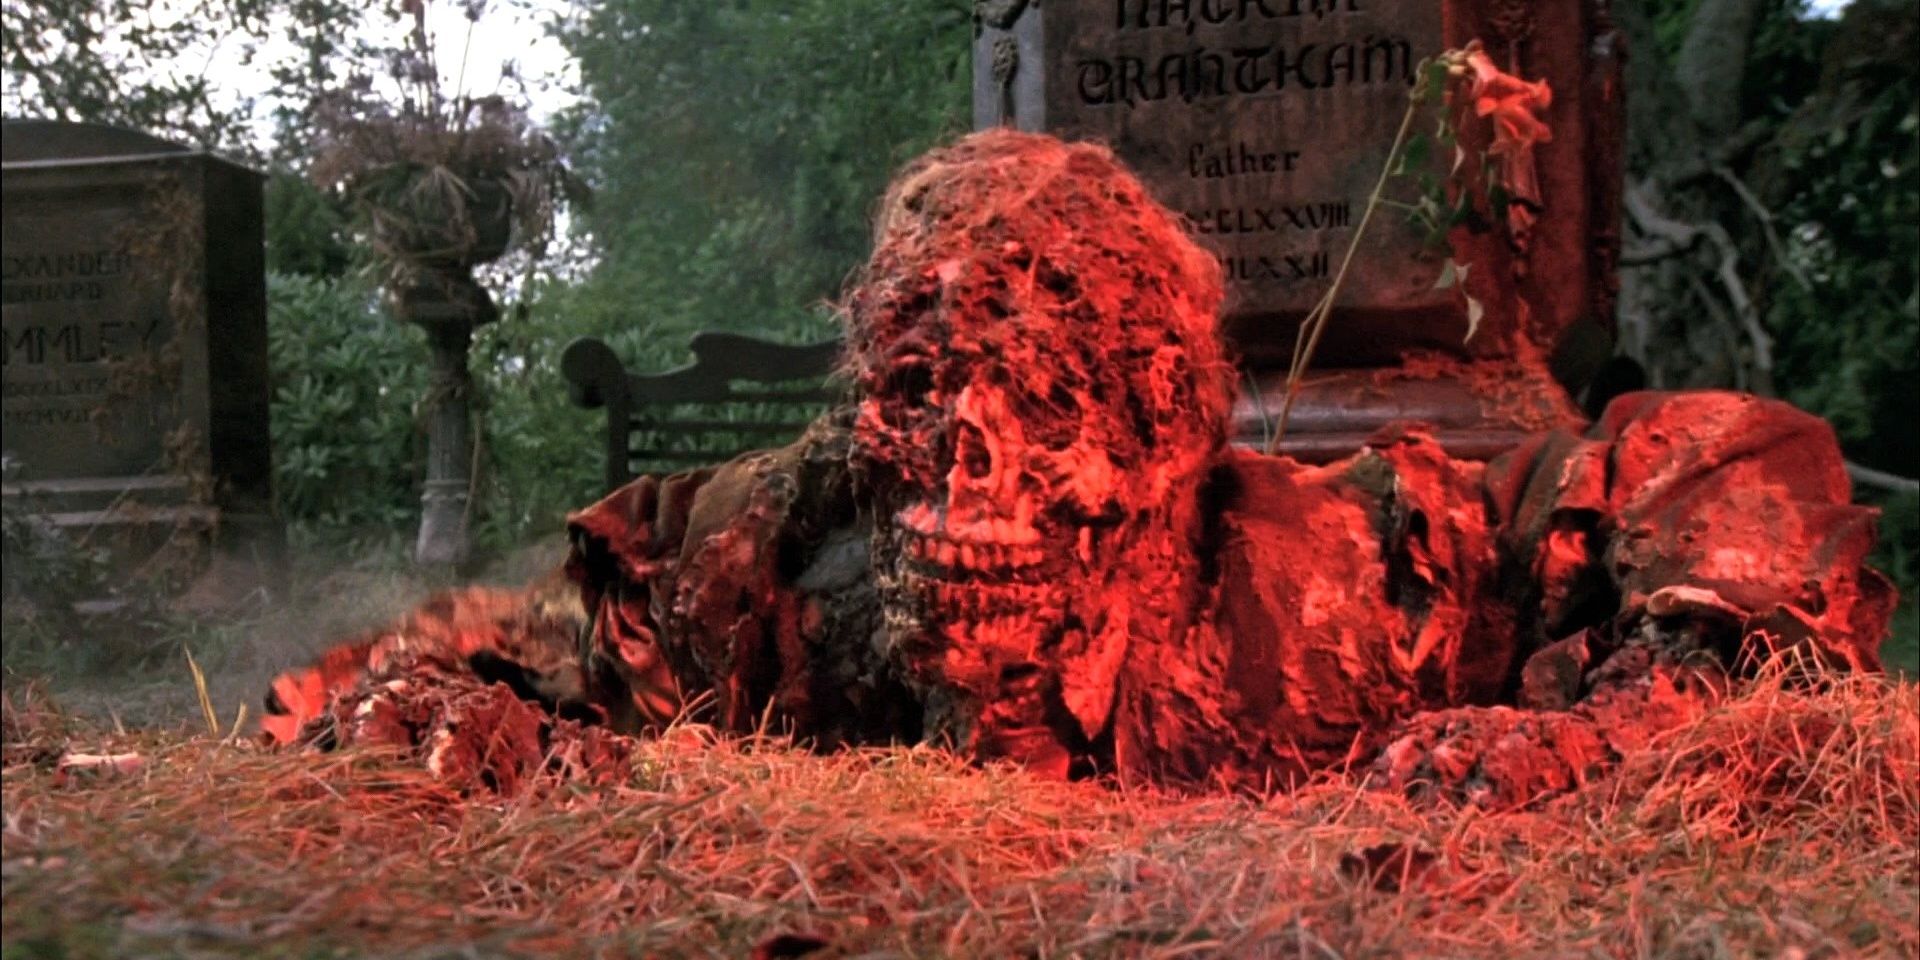 A skeleton crawls out of its grave in Creepshow 1982